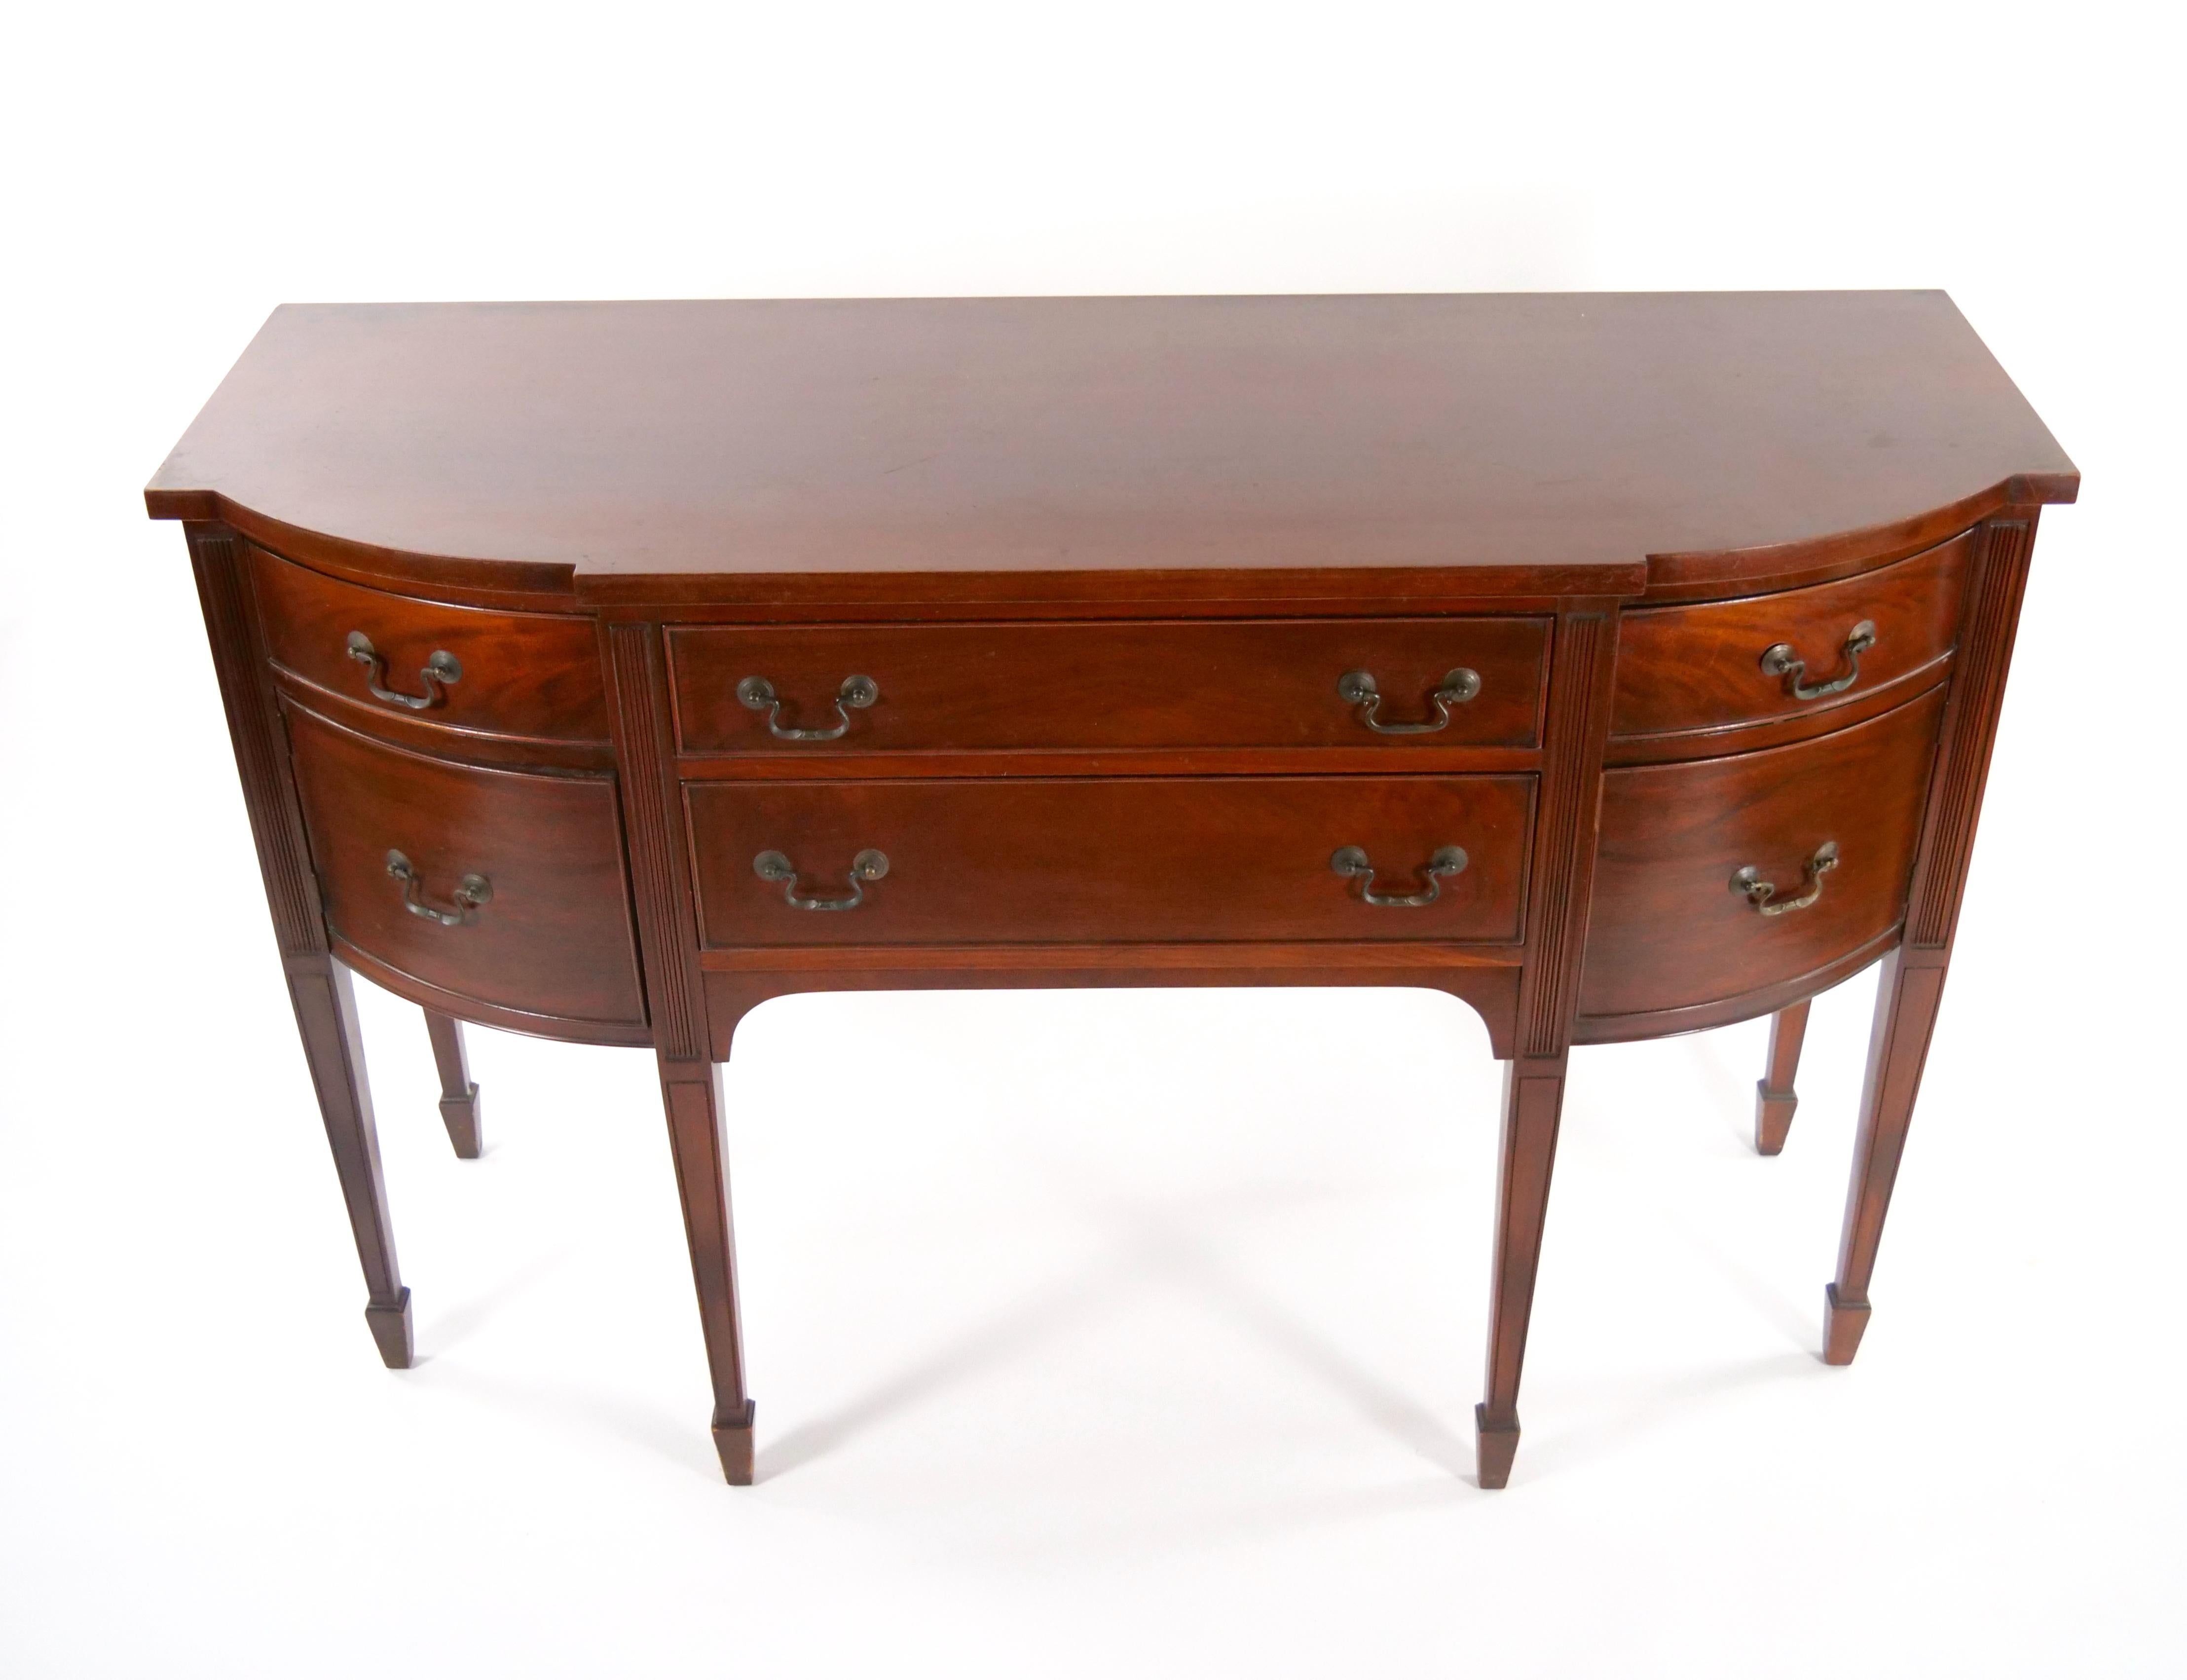 19th century Mahogany Wood Bow Front Buffet / Server  For Sale 2